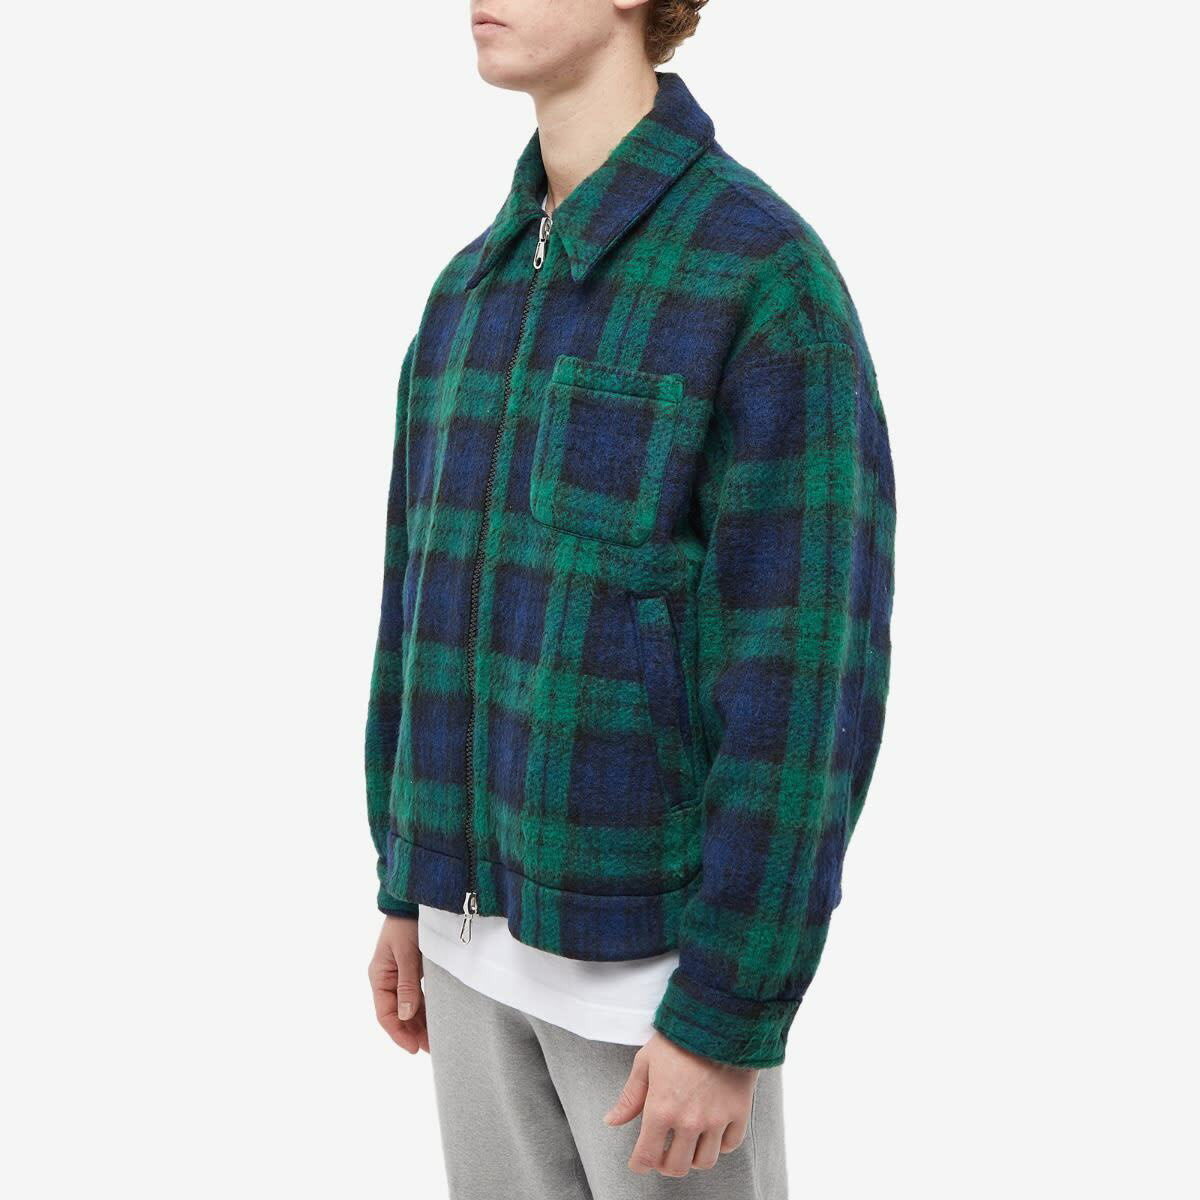 Cole Buxton Men's Flannel Overshirt in Black Watch Cole Buxton